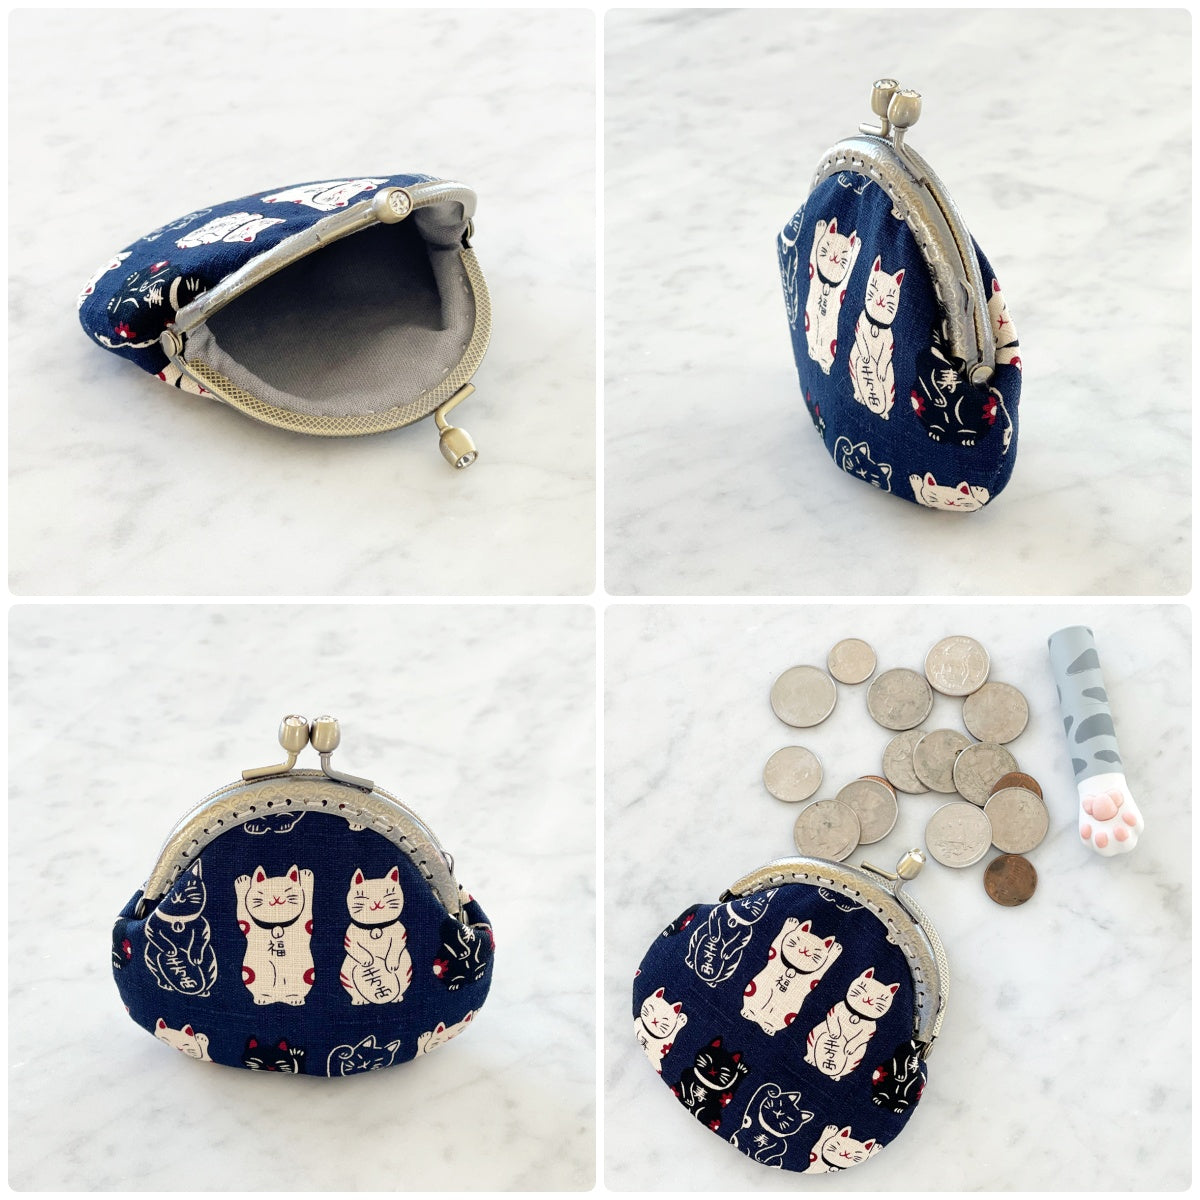 Wrapables Stylish Decorative Coin Purse, Clasp Wallet